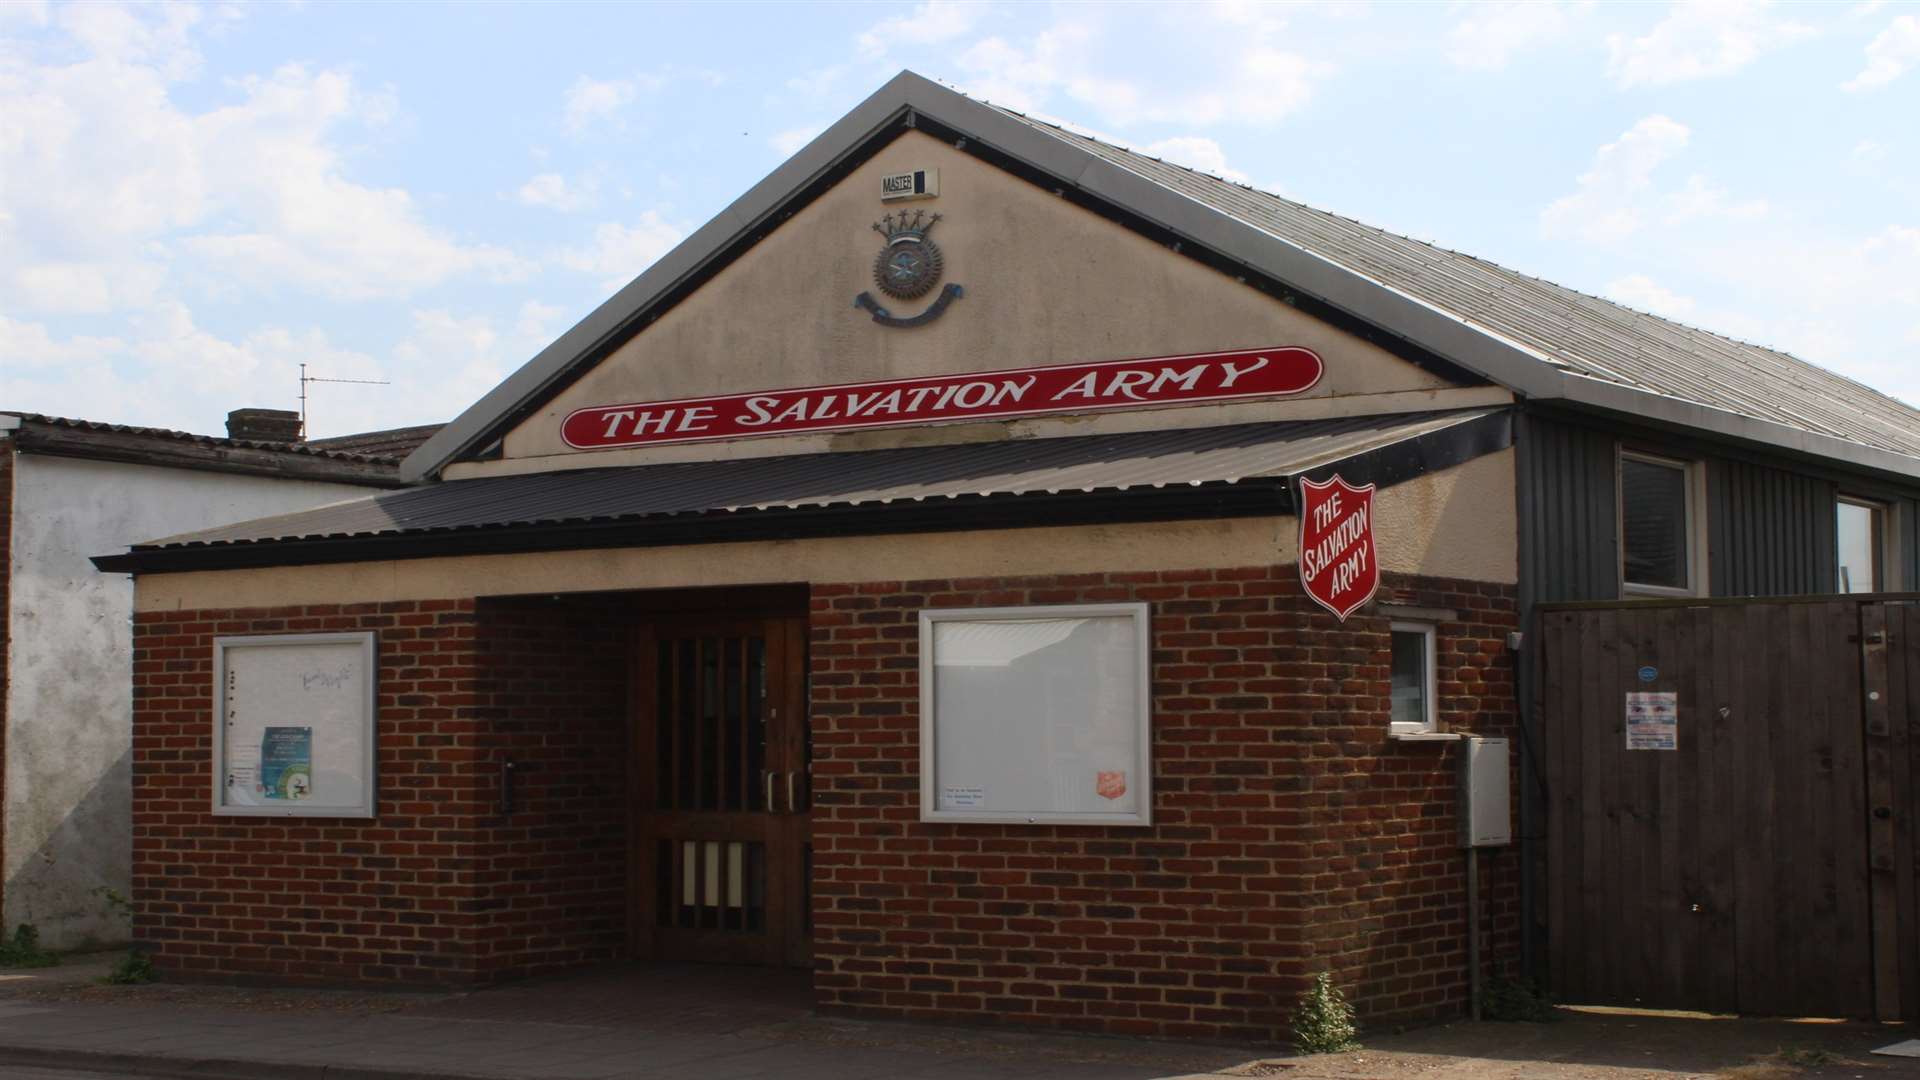 The Salvation Army hall in Sheerness